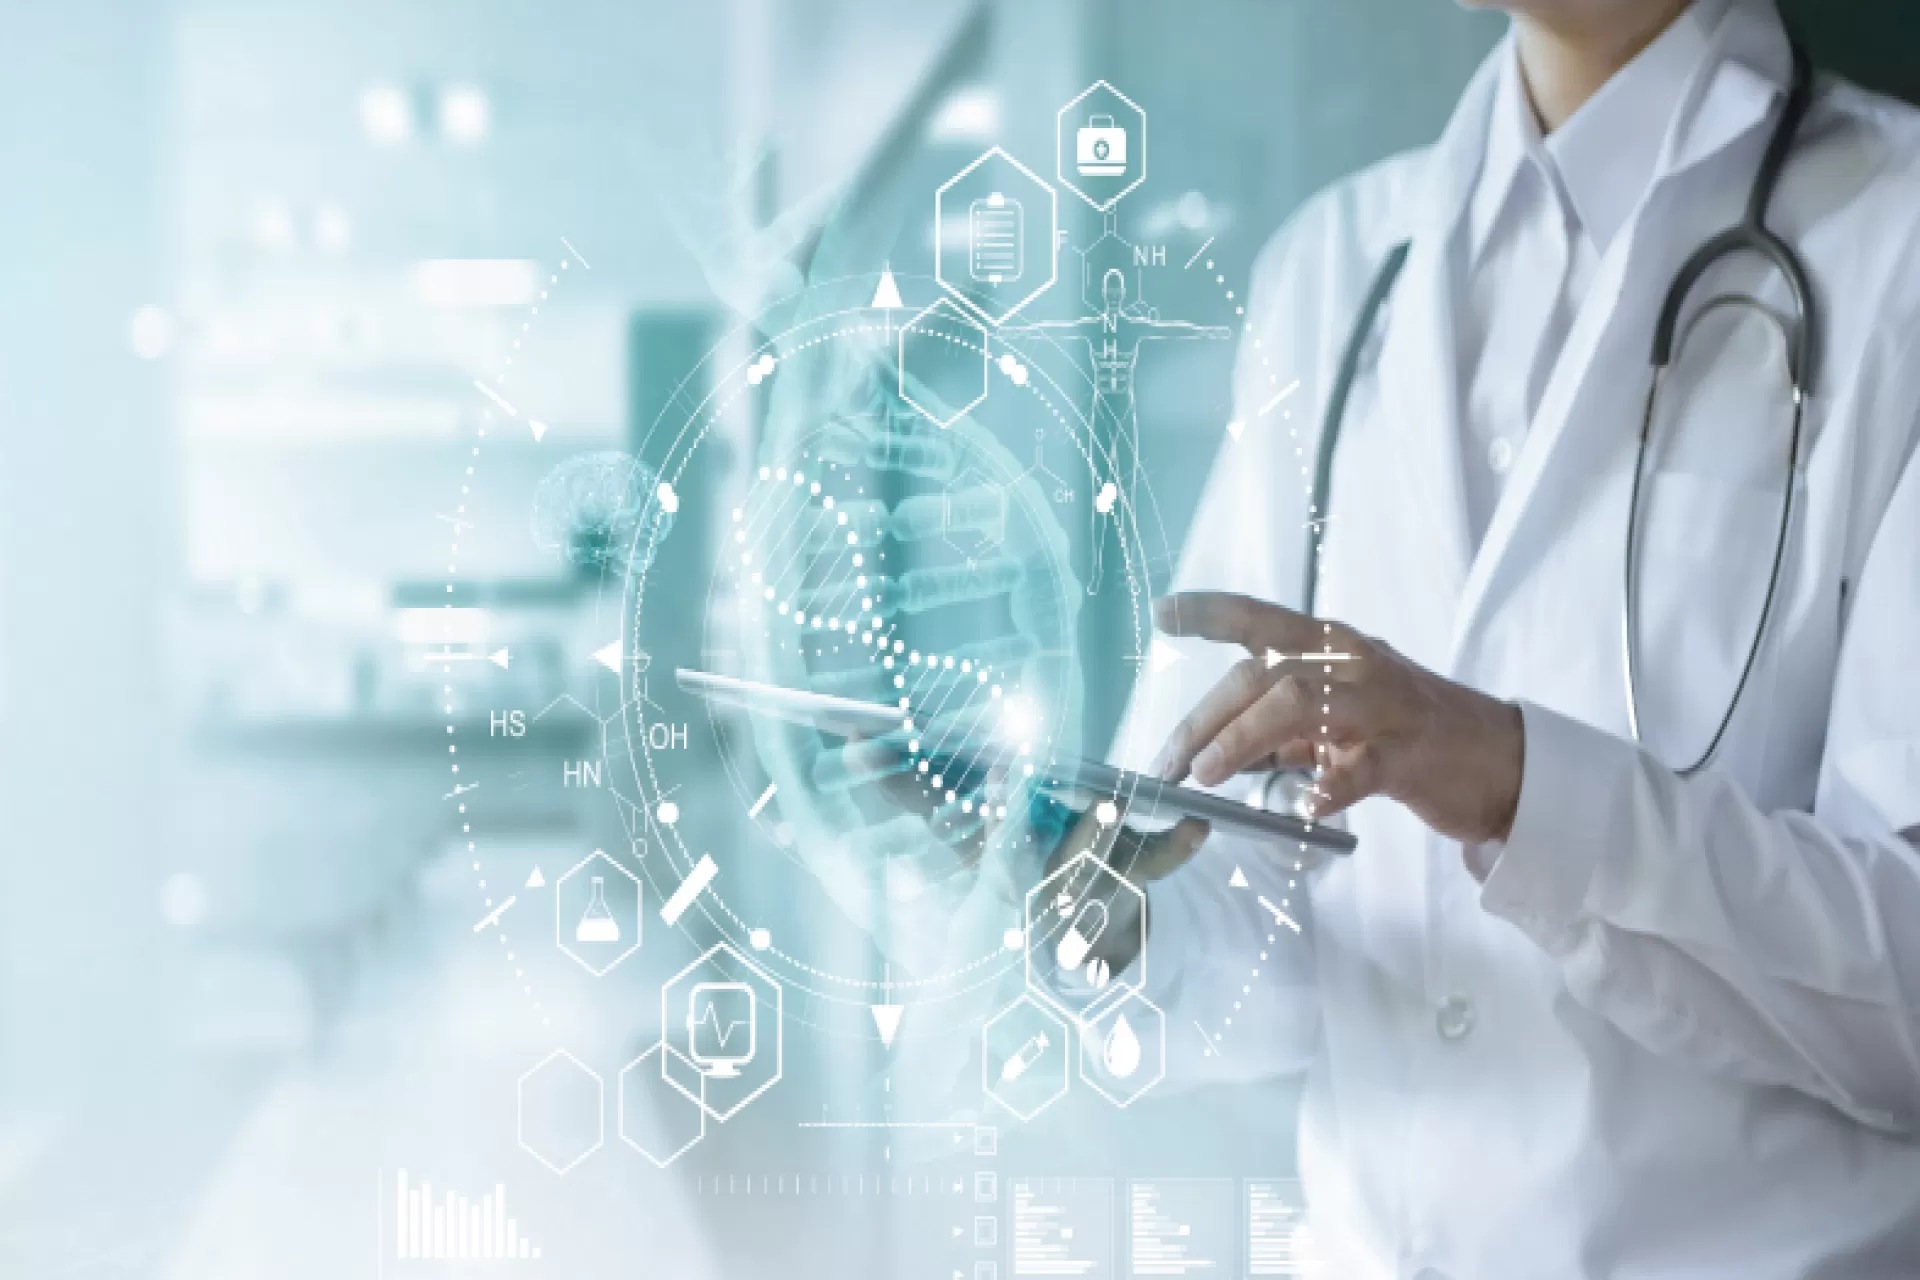 Top 10 Trends for HealthTech in 2020